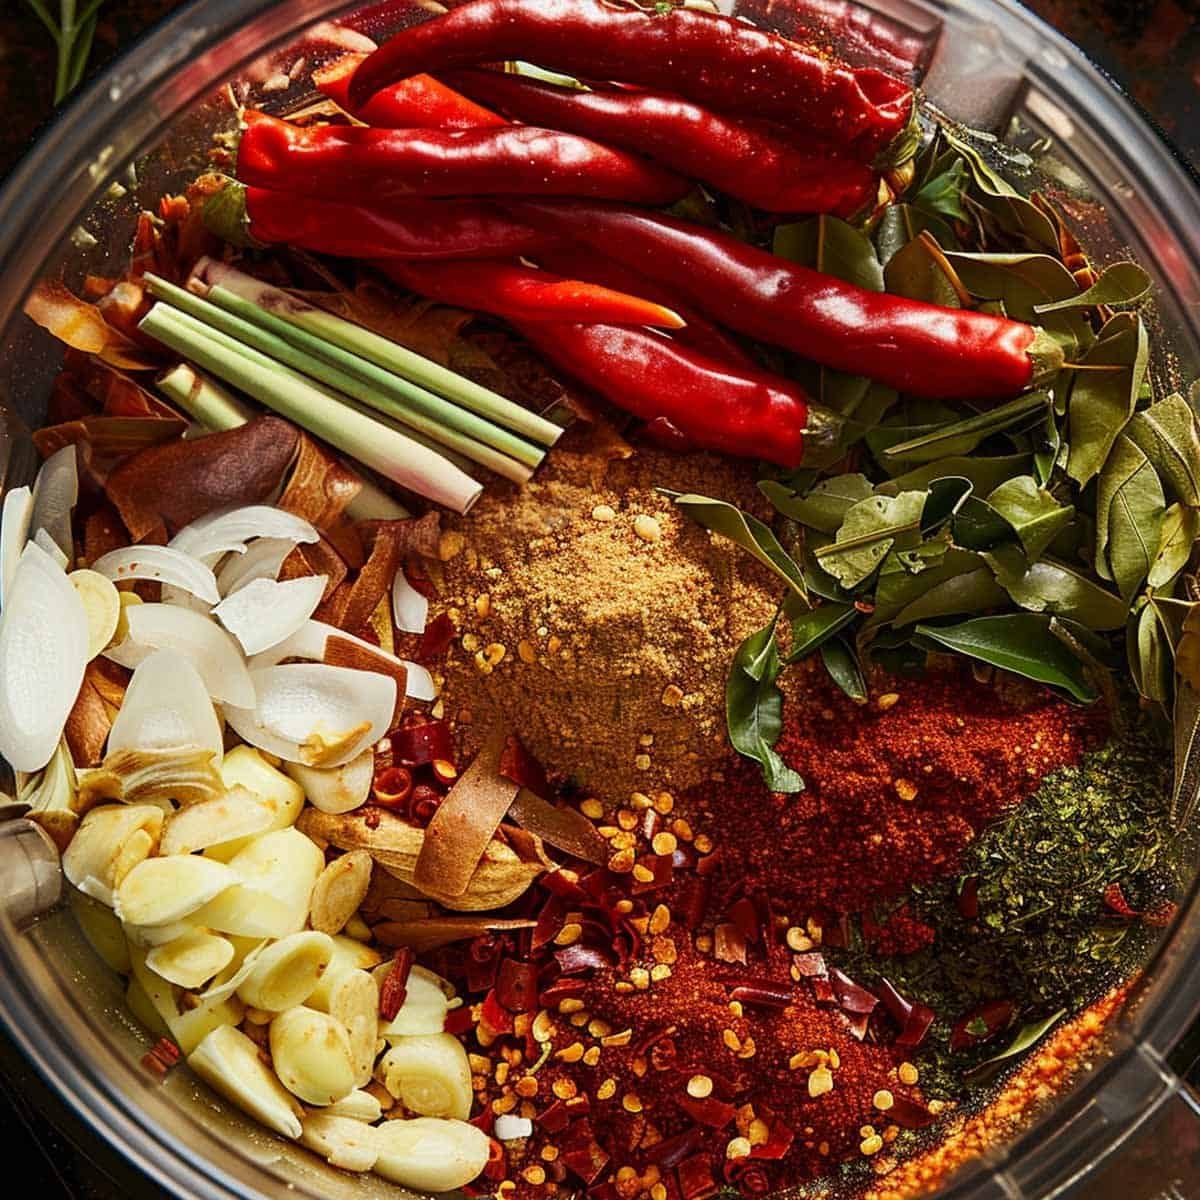 Fresh ingredients for Massaman Curry Paste recipe added to a food processor, including lemongrass, galangal, and various spices.